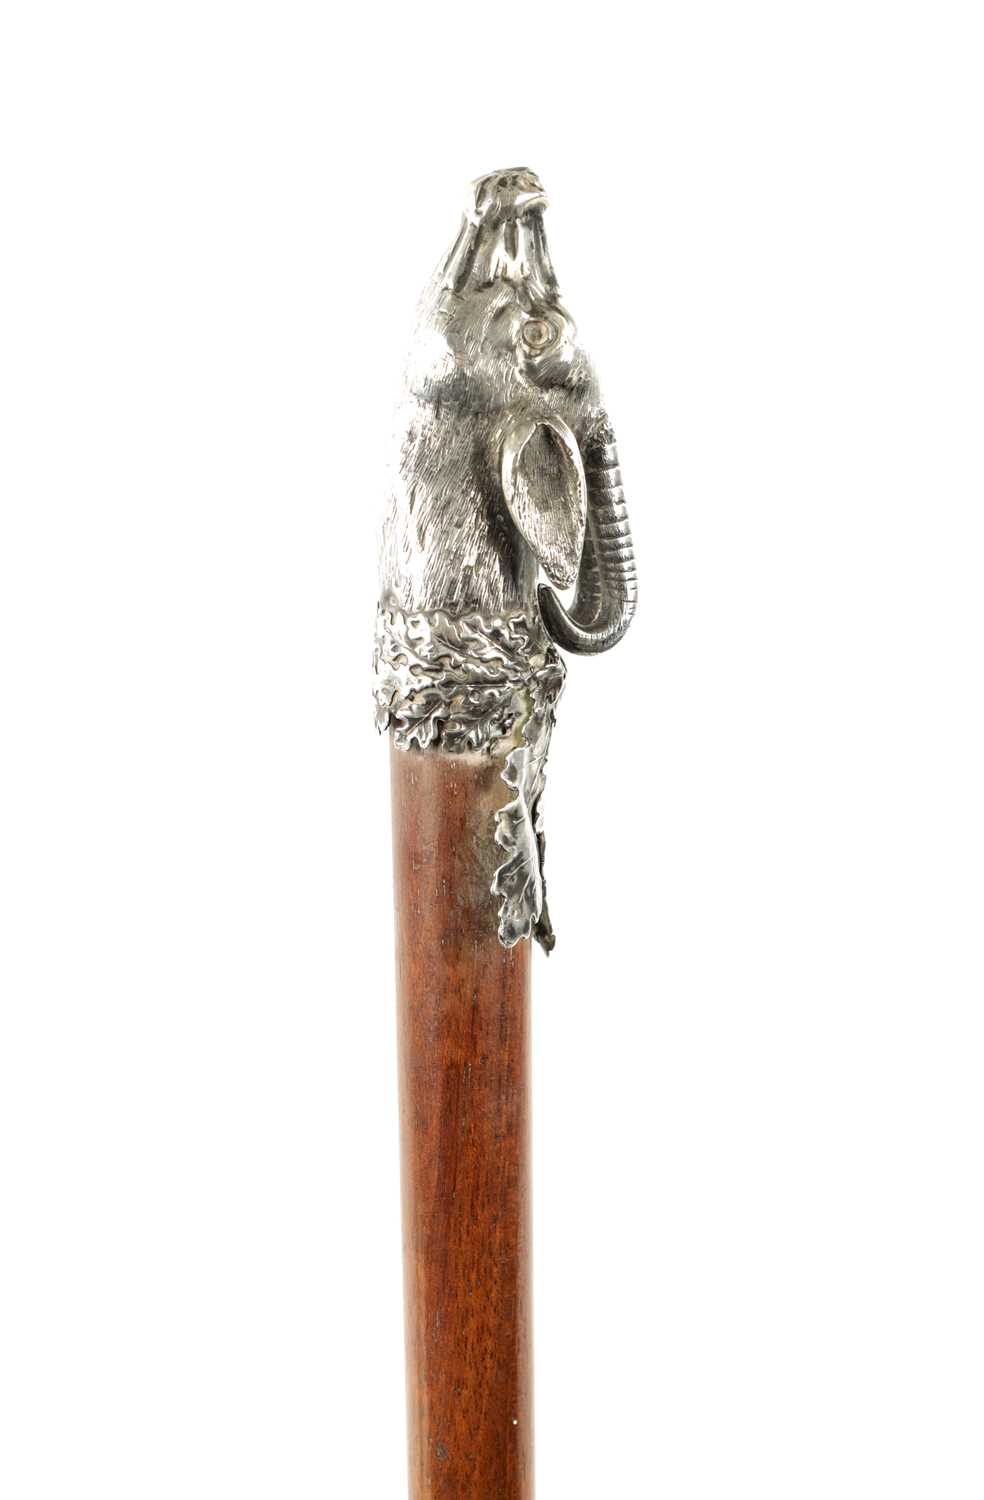 AN EARLY 20TH CENTURY CONTINENTAL SILVER-HANDLED WALKING CANE